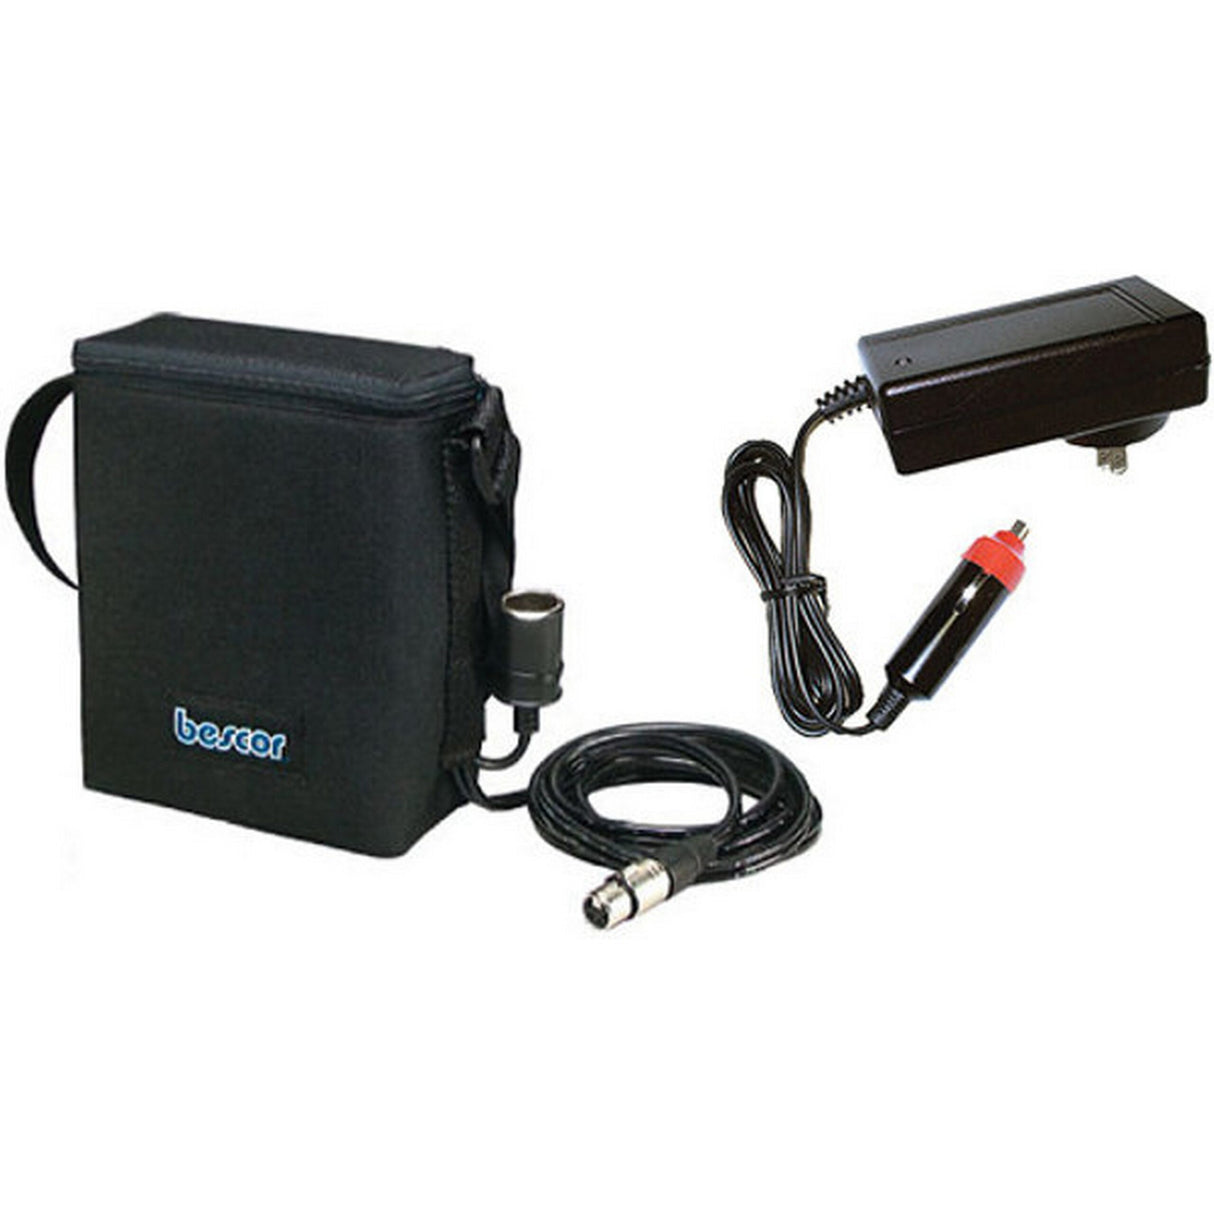 Bescor SLM-5XLRATM 12V/4.5A SLA Battery with 4-Pin XLR and Auto Charger